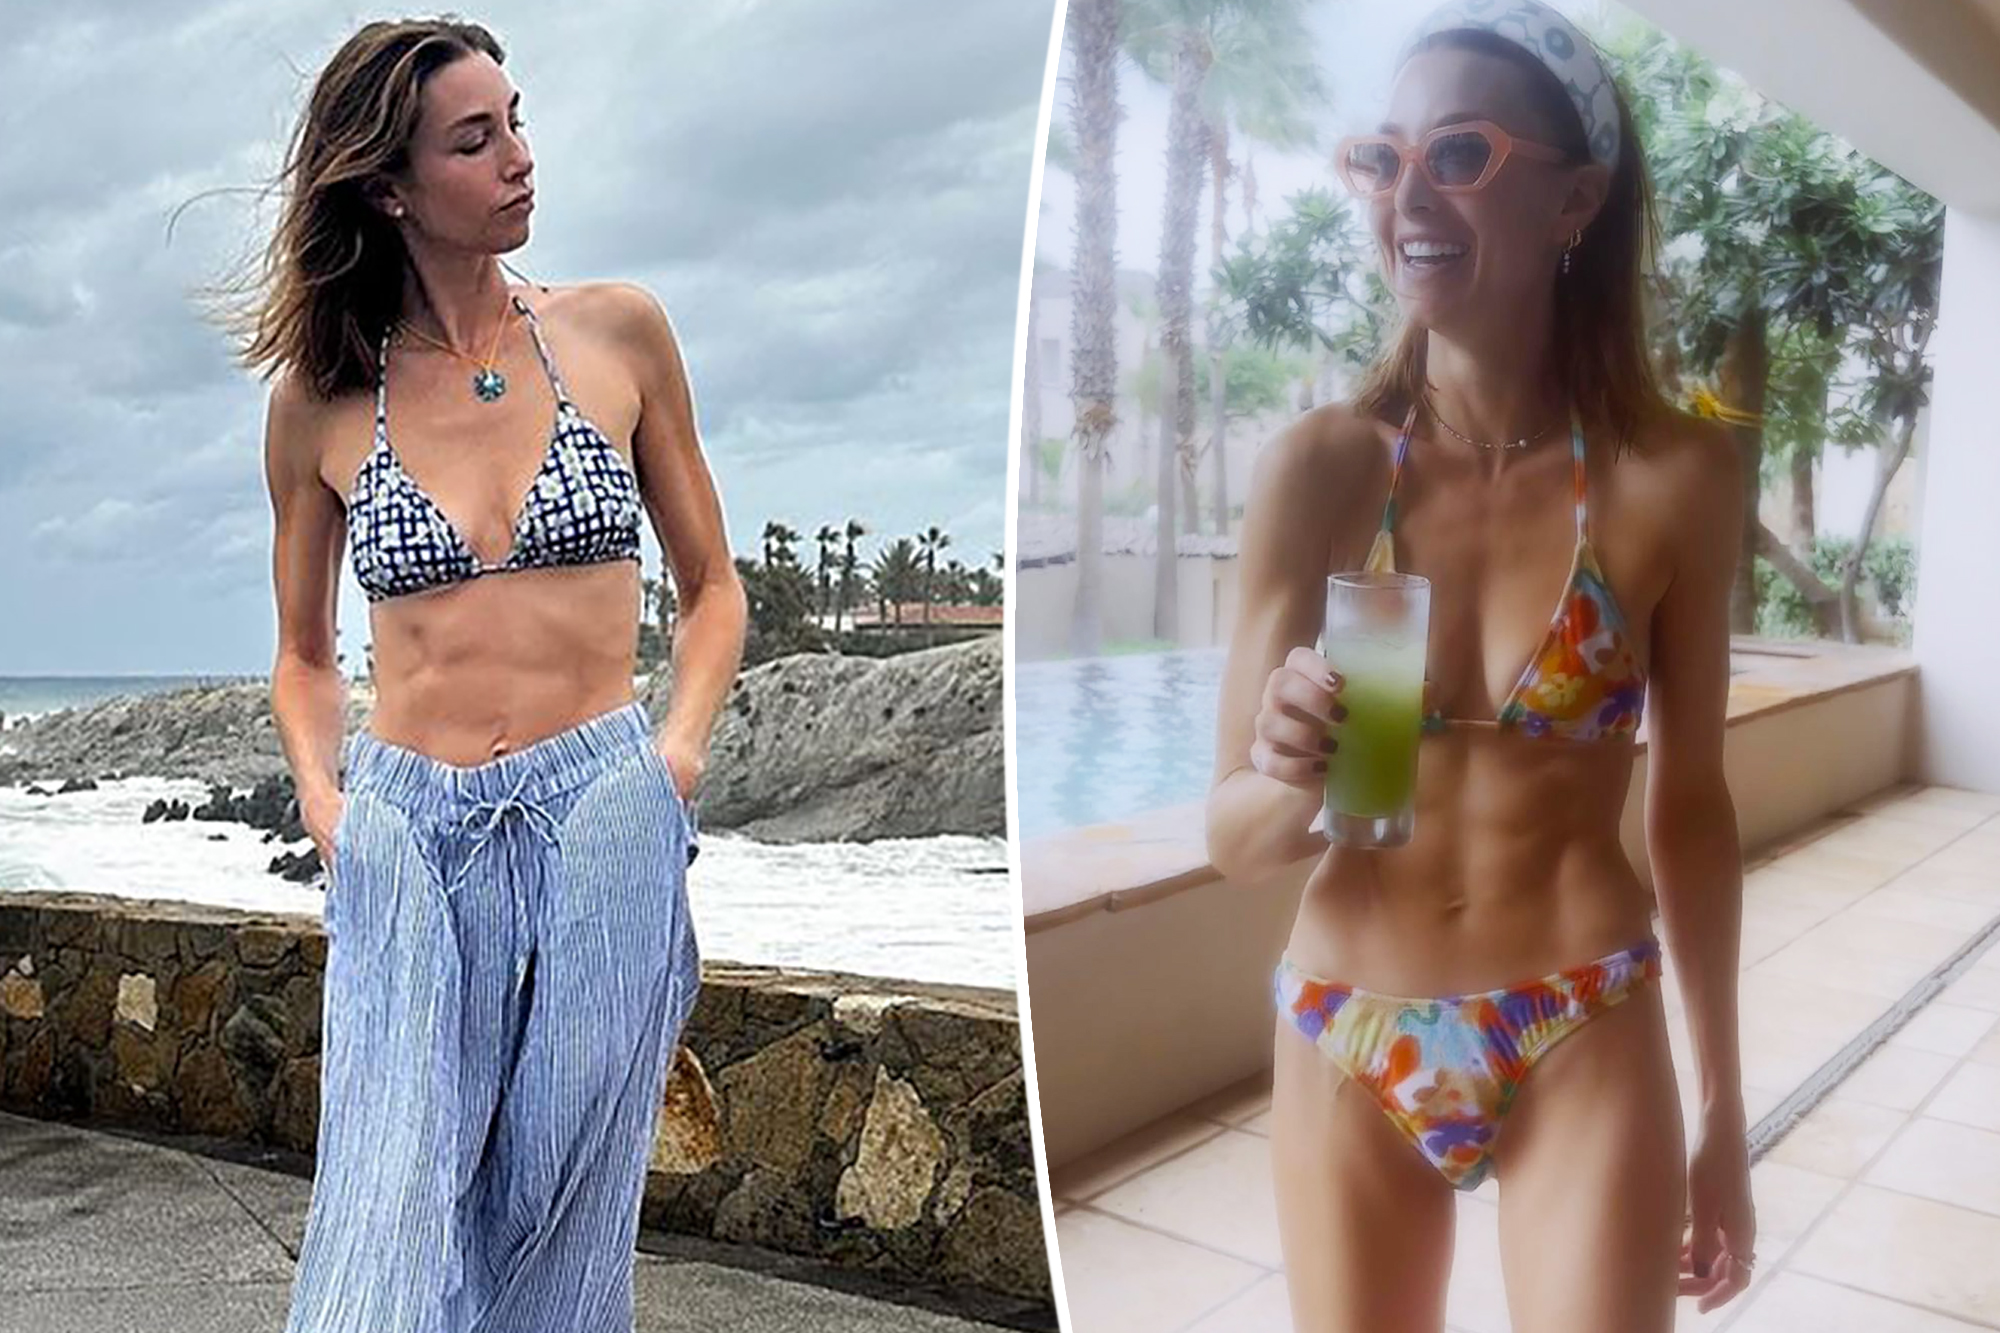 brittany altamirano recommends anorexic woman on beach pic